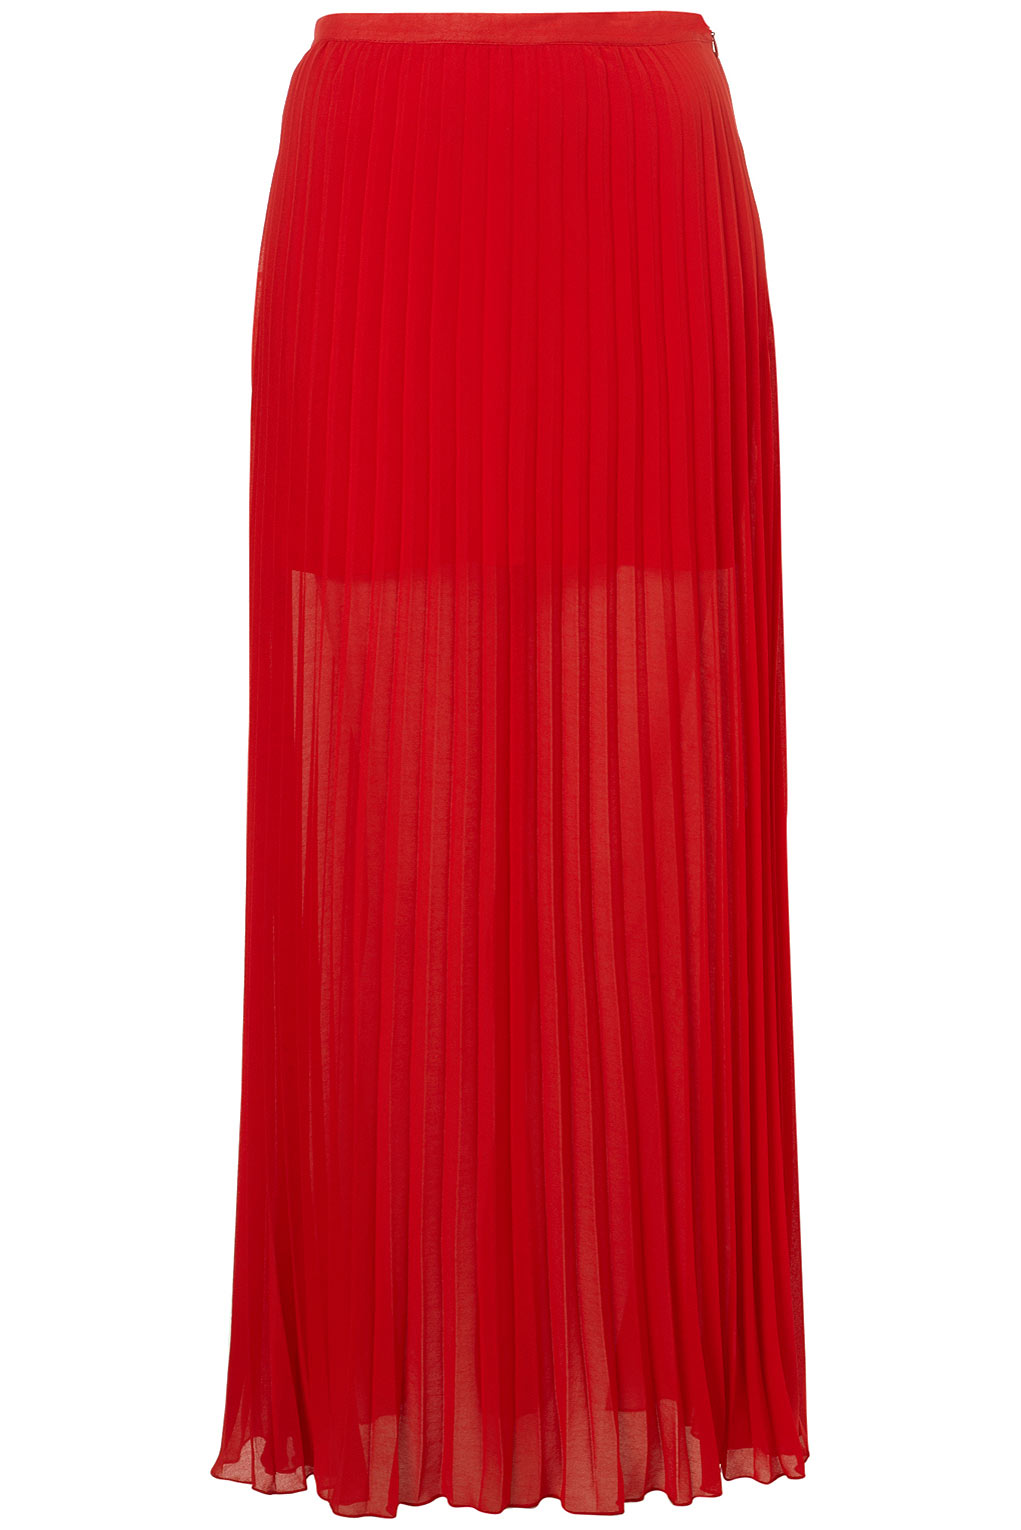 Topshop Bright Red Pleated Maxi Skirt in Red | Lyst